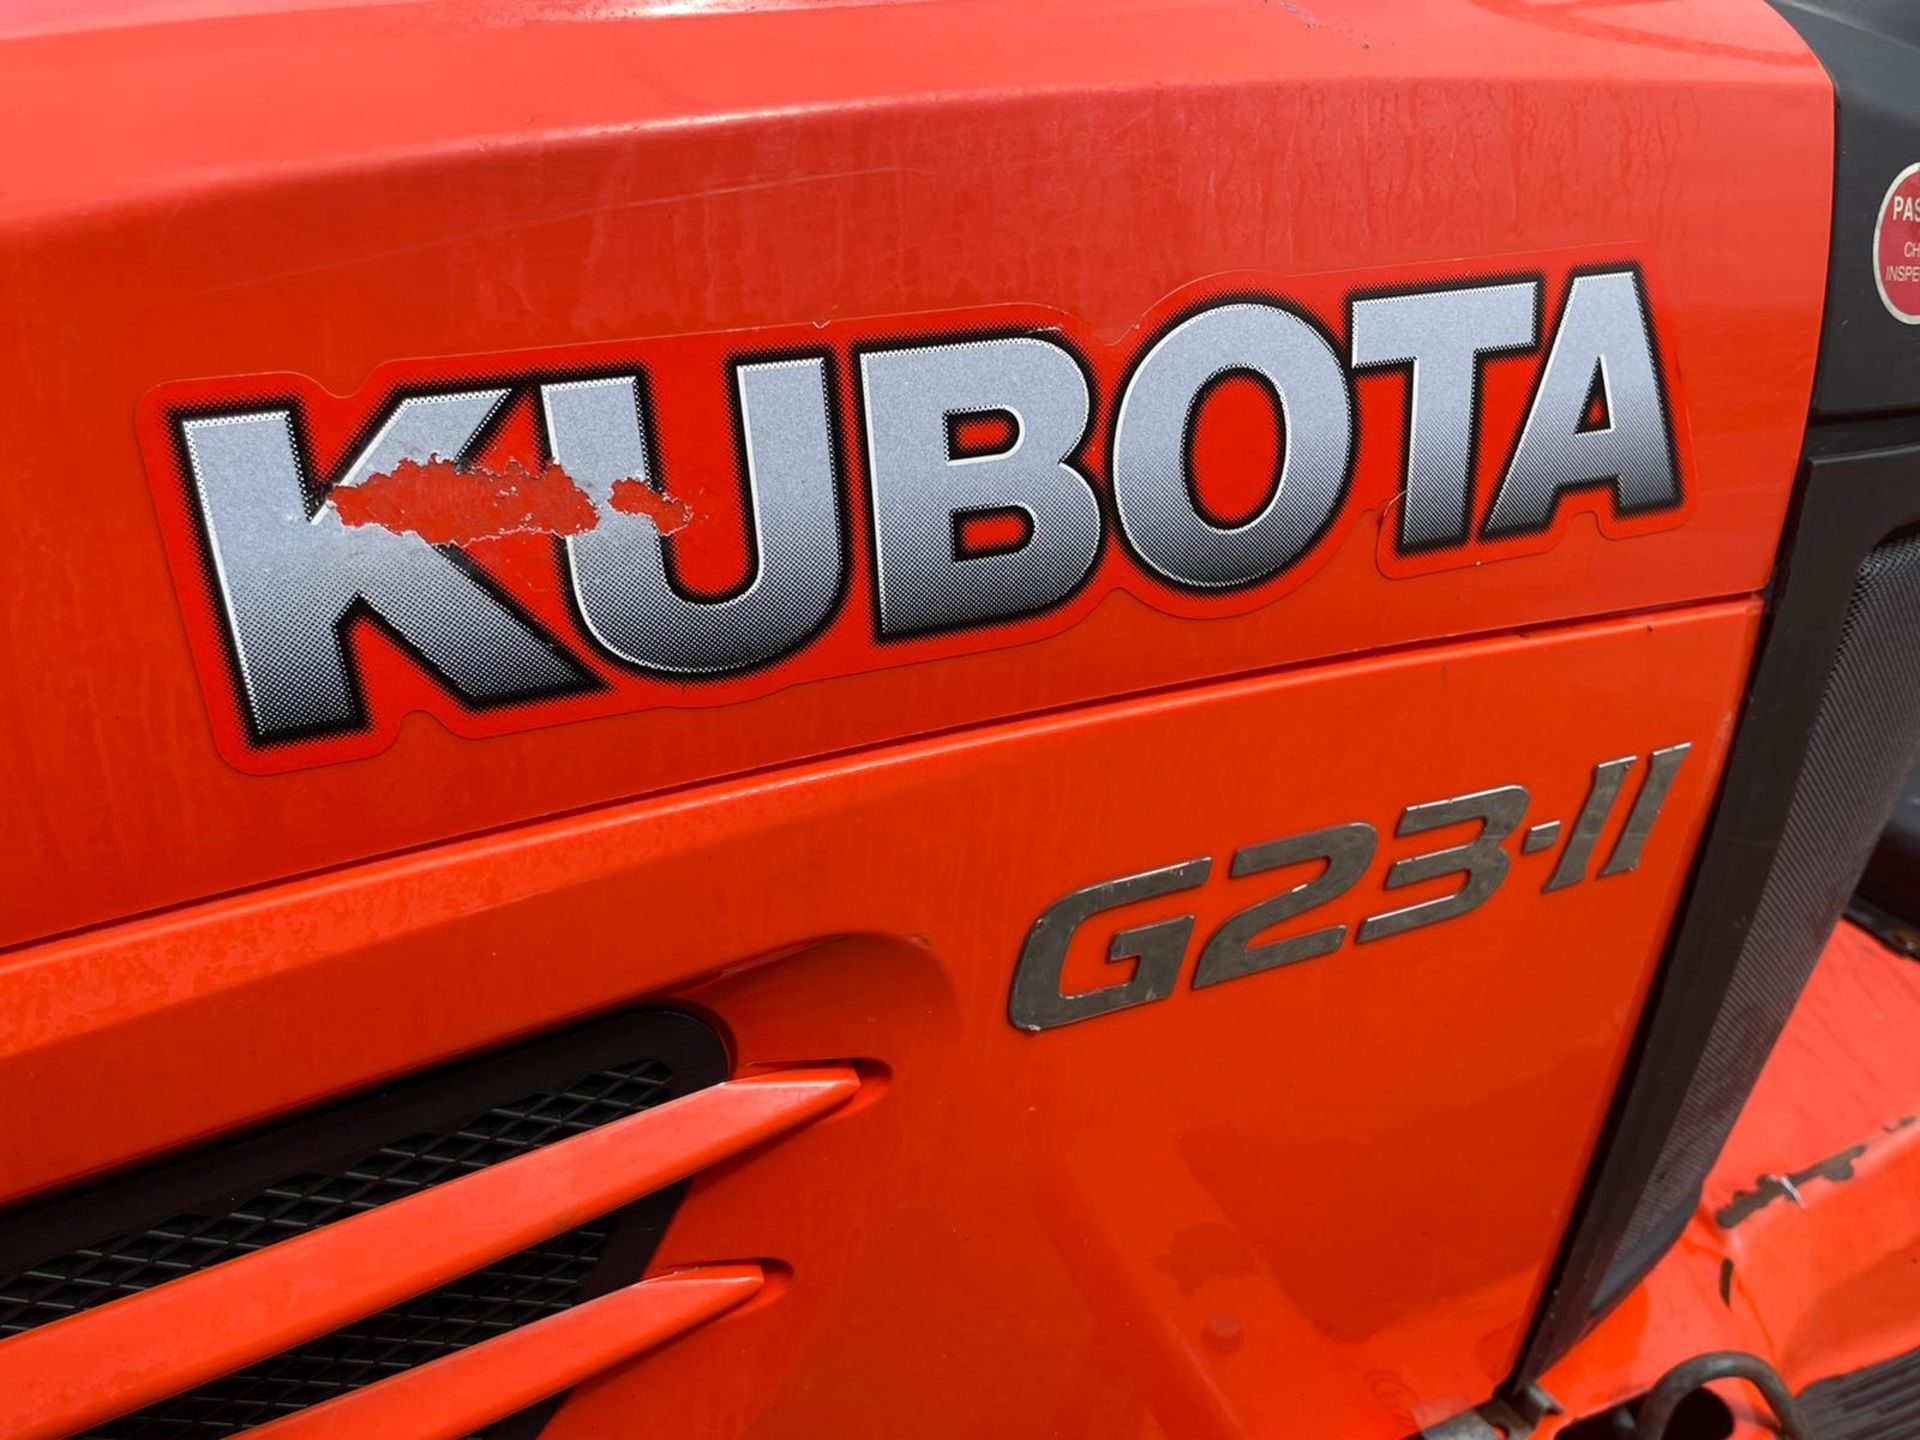 2013 KUBOTA G23-II RIDE ON HIGH TIP MOWER, RUNS AND DRIVES, SHOWING A LOW 771 HOURS *PLUS VAT* - Image 11 of 11